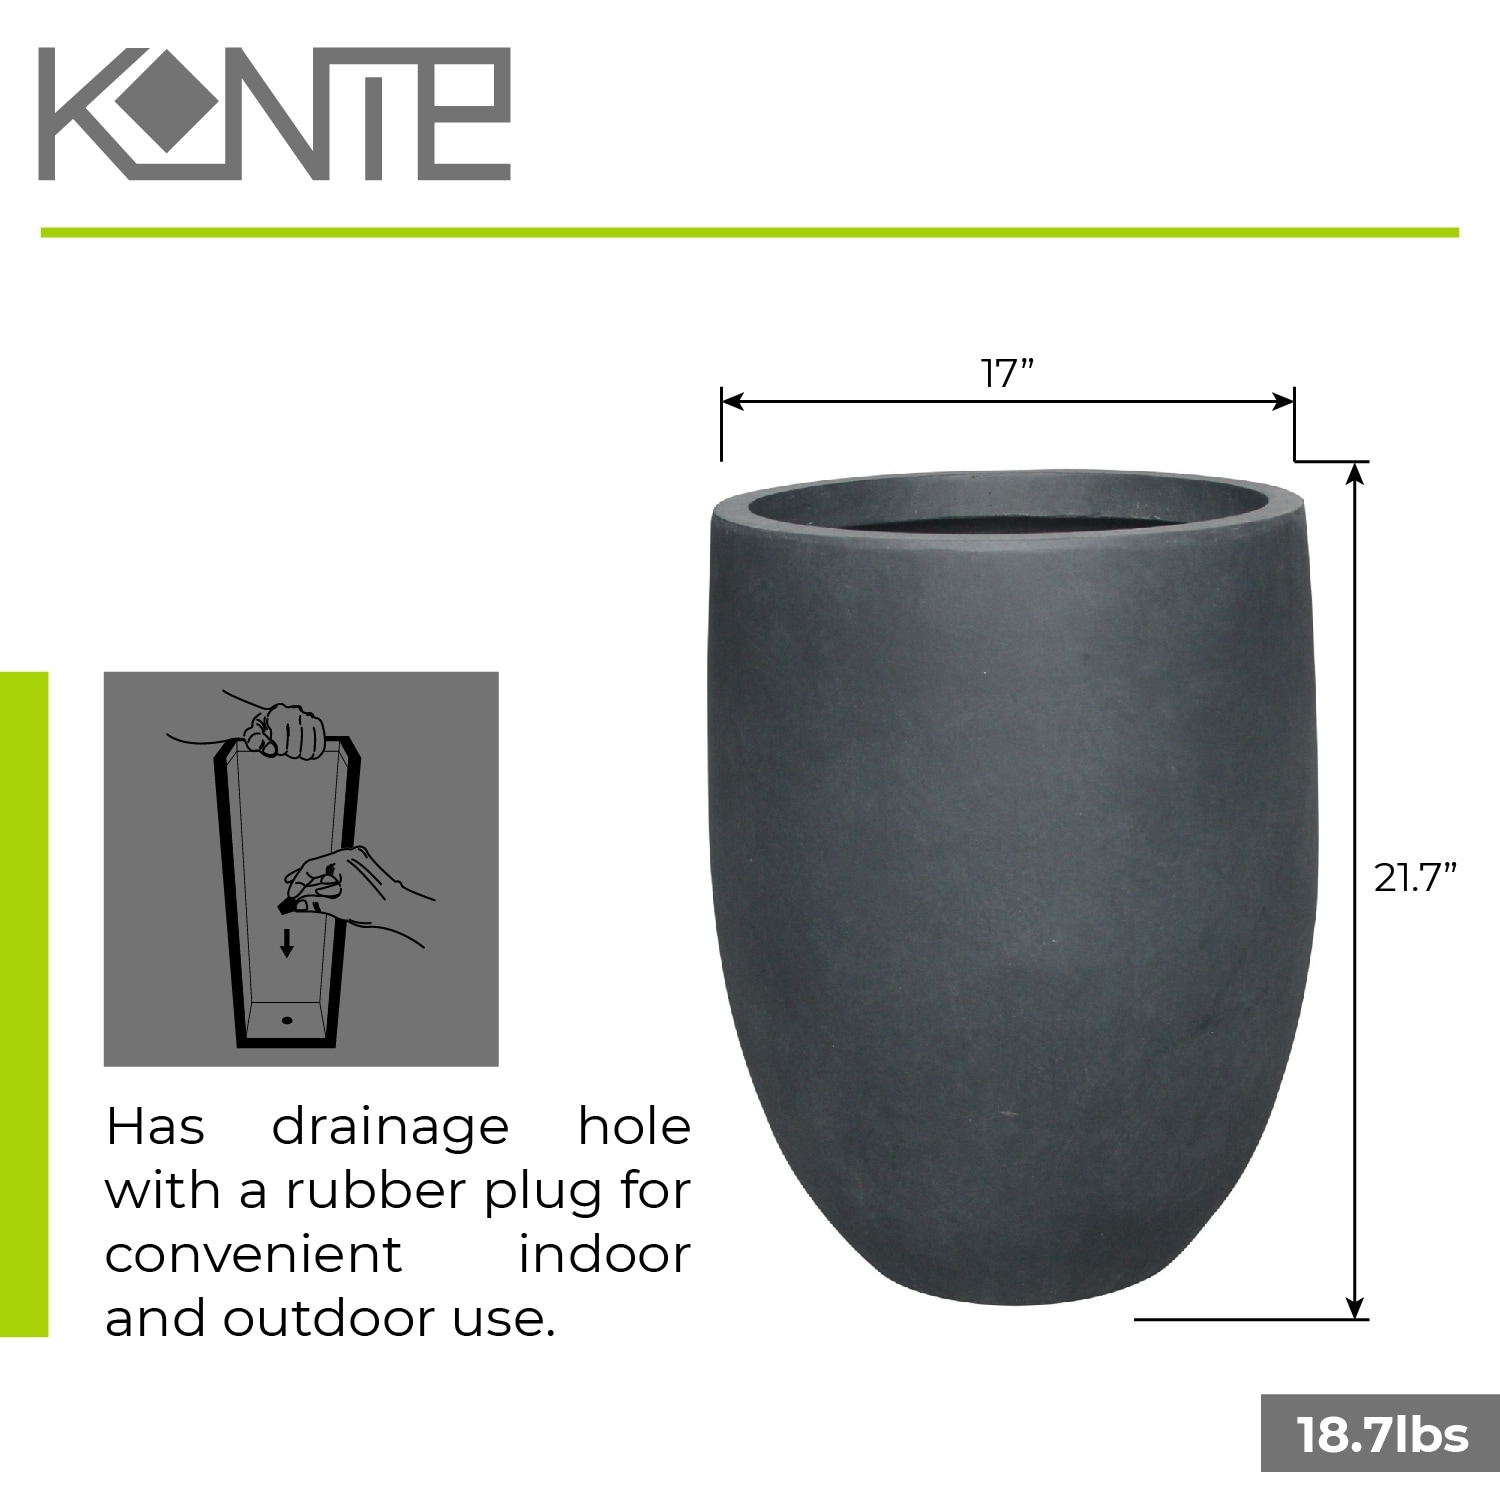 Kante 21.7H Natural Concrete Tall Planter, Large Outdoor Indoor Decorative Pot w/Drainage Hole and Rubber Plug, Modern Round